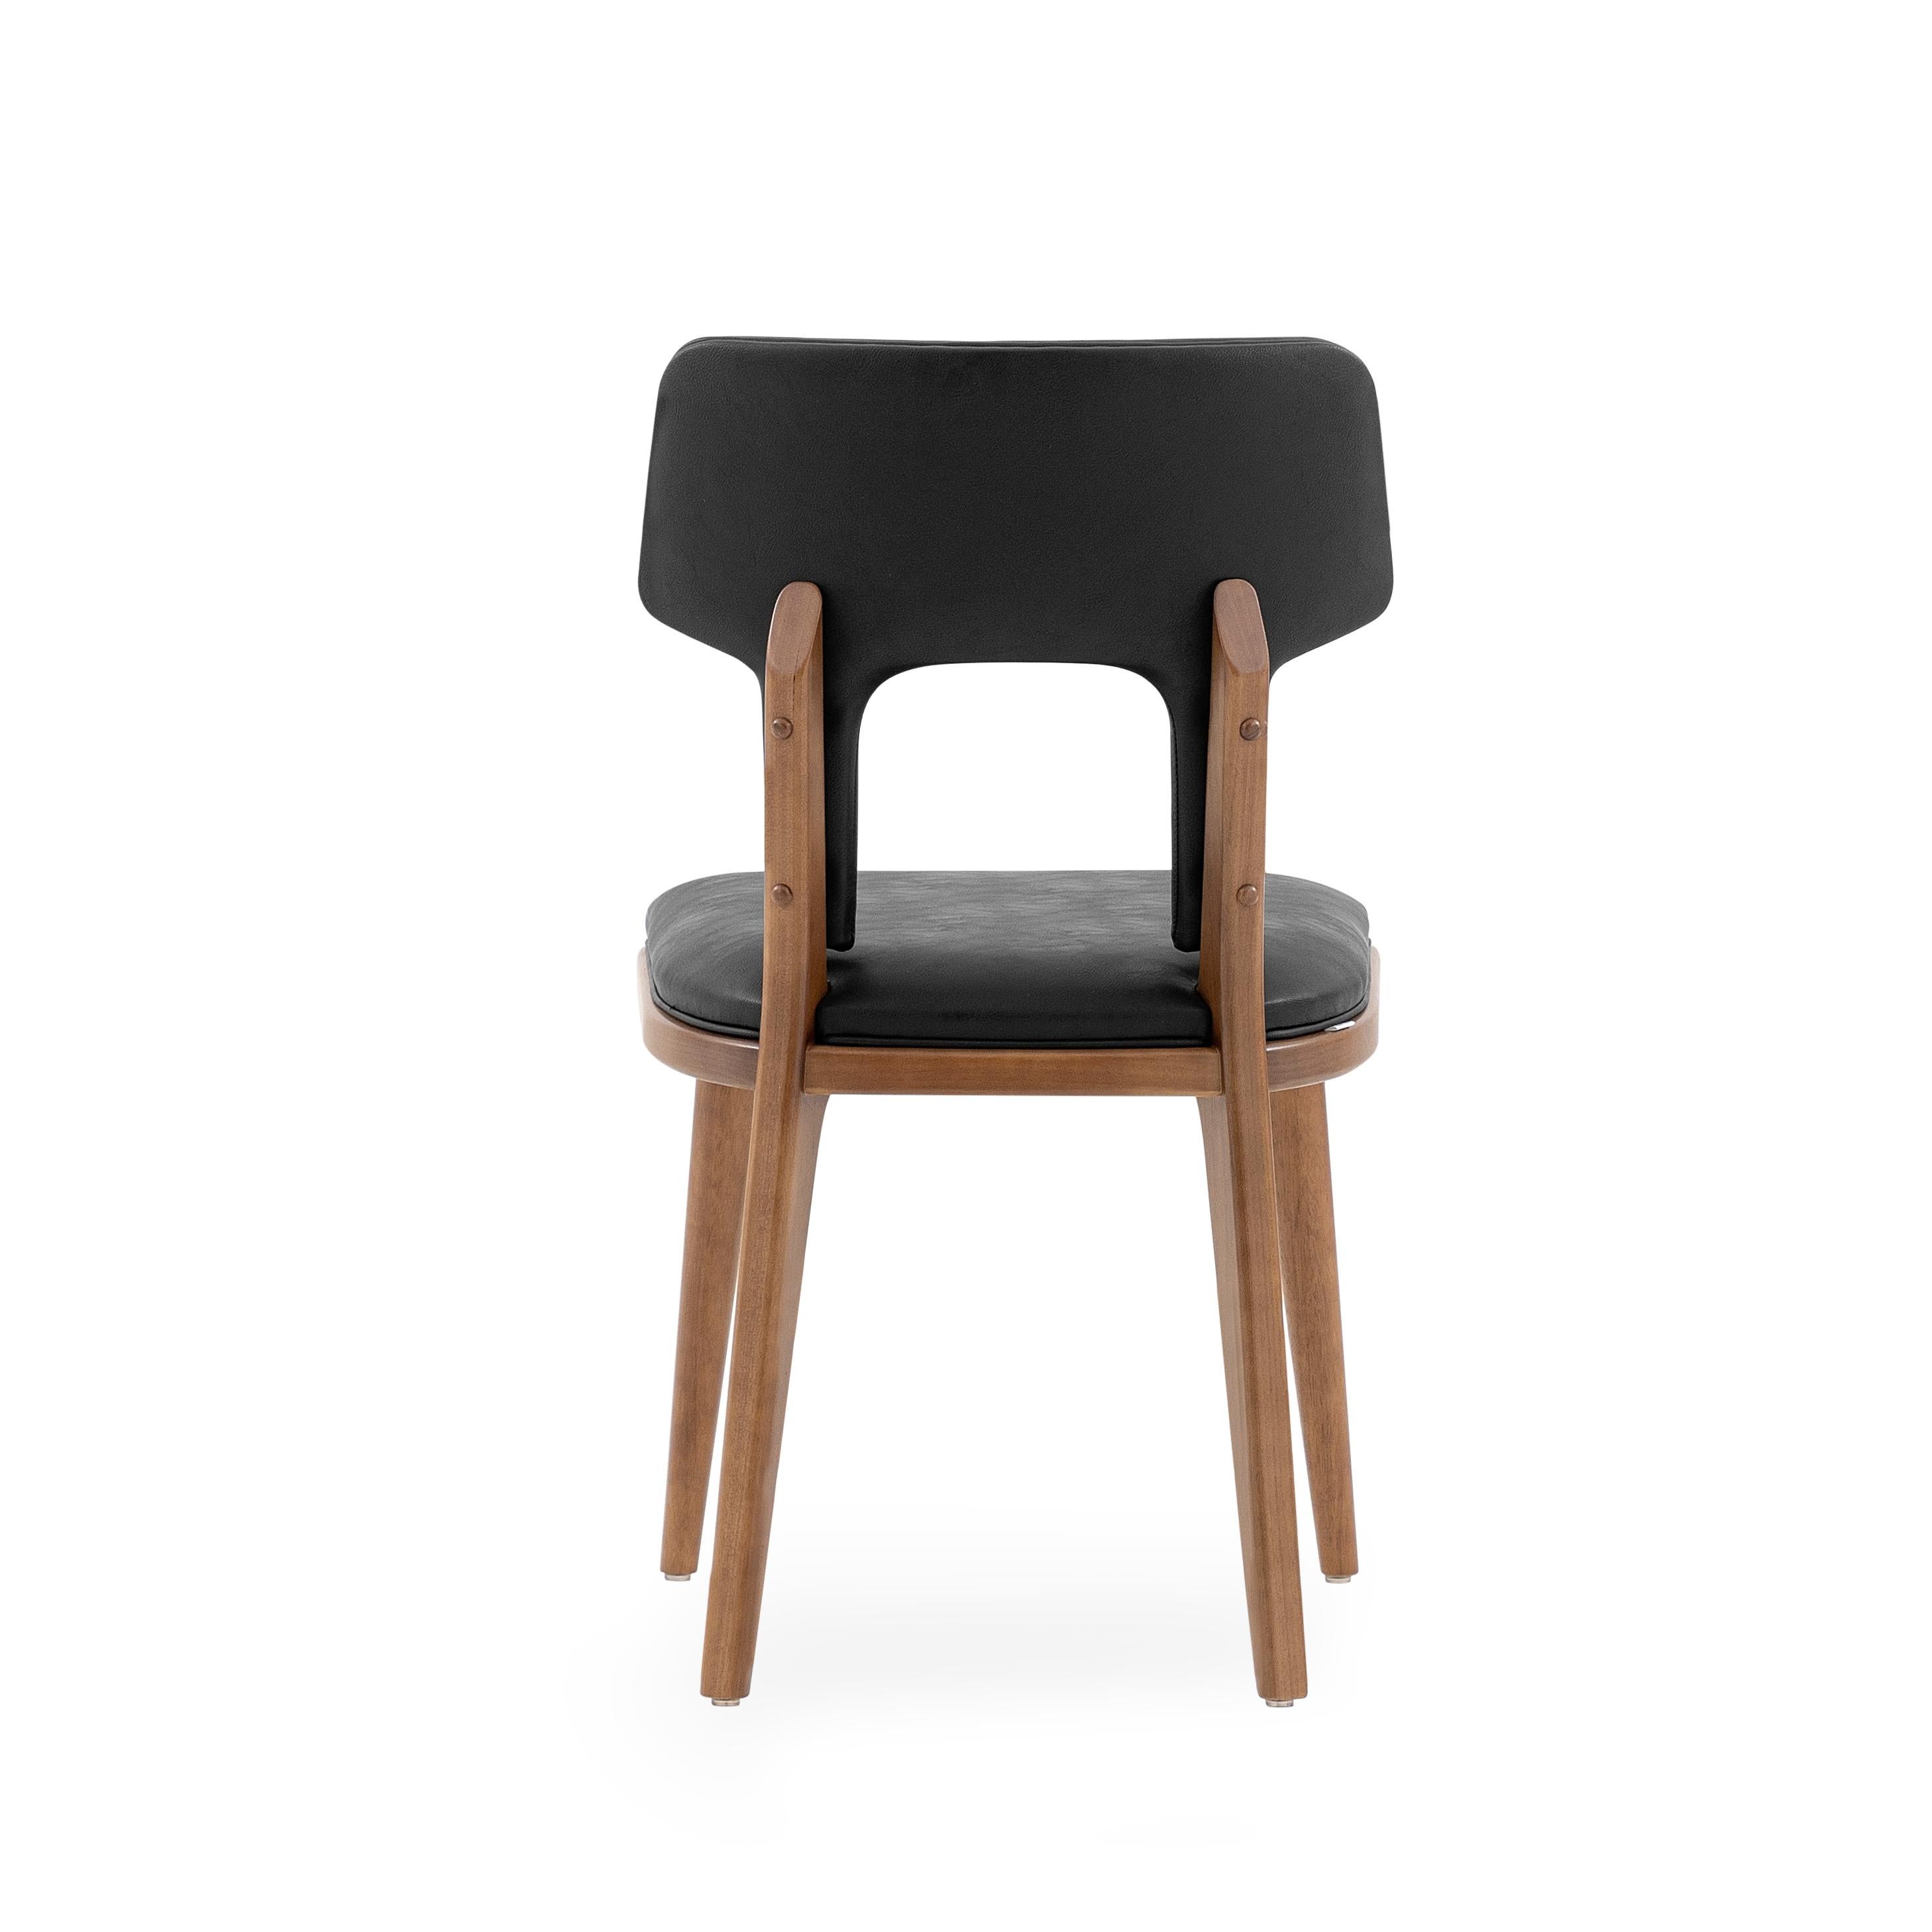 Fork Dining Chair in Black Fabric and Almond Oak Wood Finish, Set of 2 In New Condition For Sale In Miami, FL